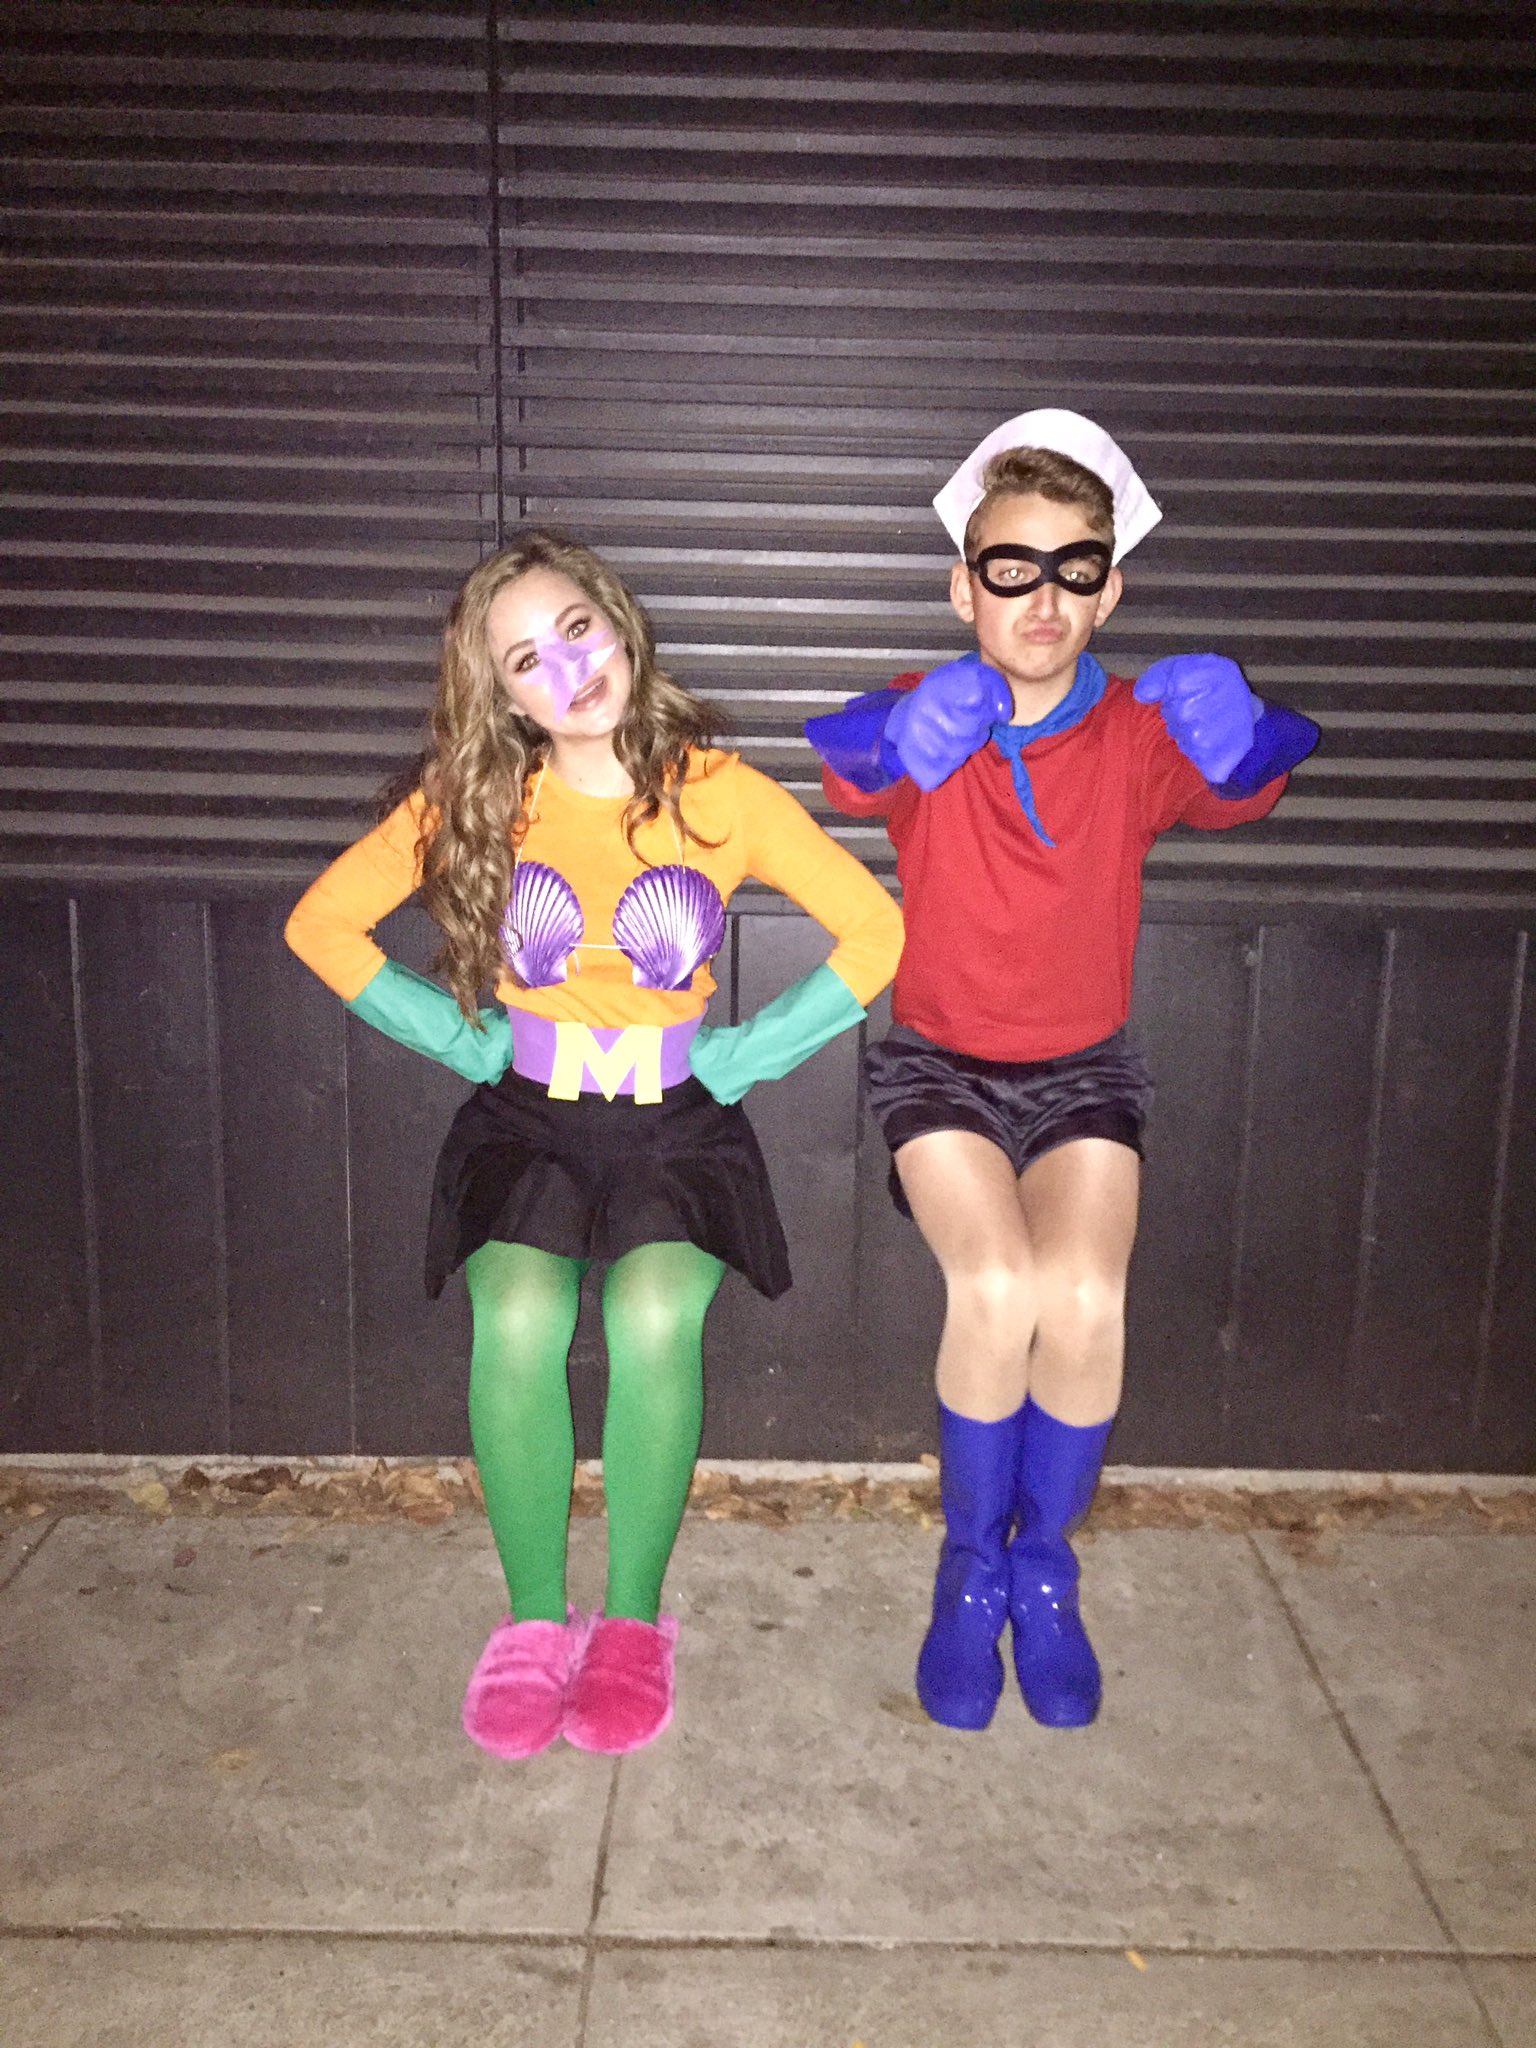 Brec Bassinger on X: "MERMAID MAN AND BARNACLE BOY take on halloween on land. https://t.co/1rQfxyMJ6X" / X